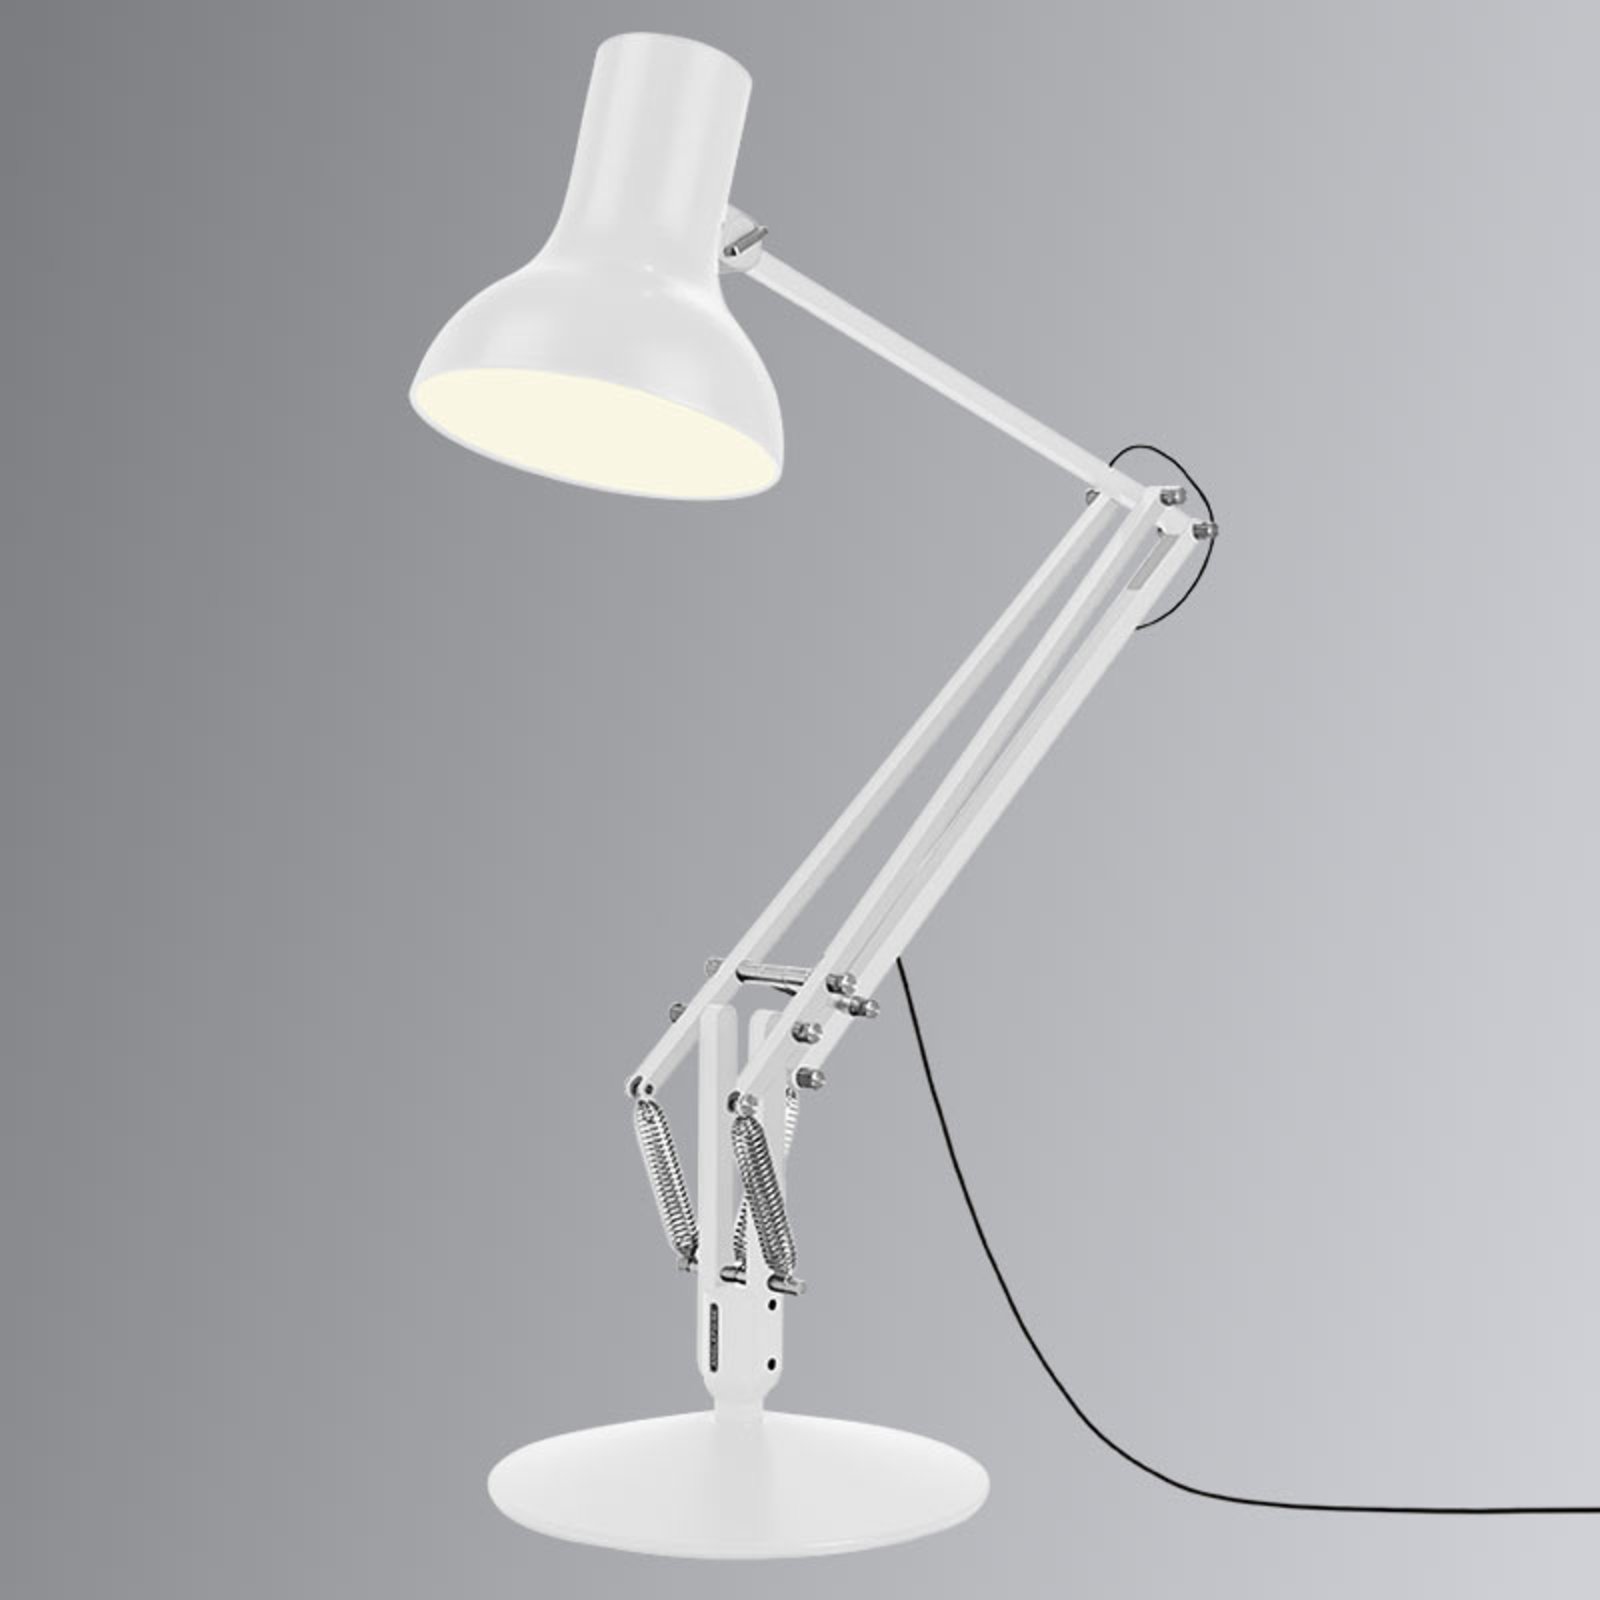 Anglepoise Type 75 Giant lampadaire blanc